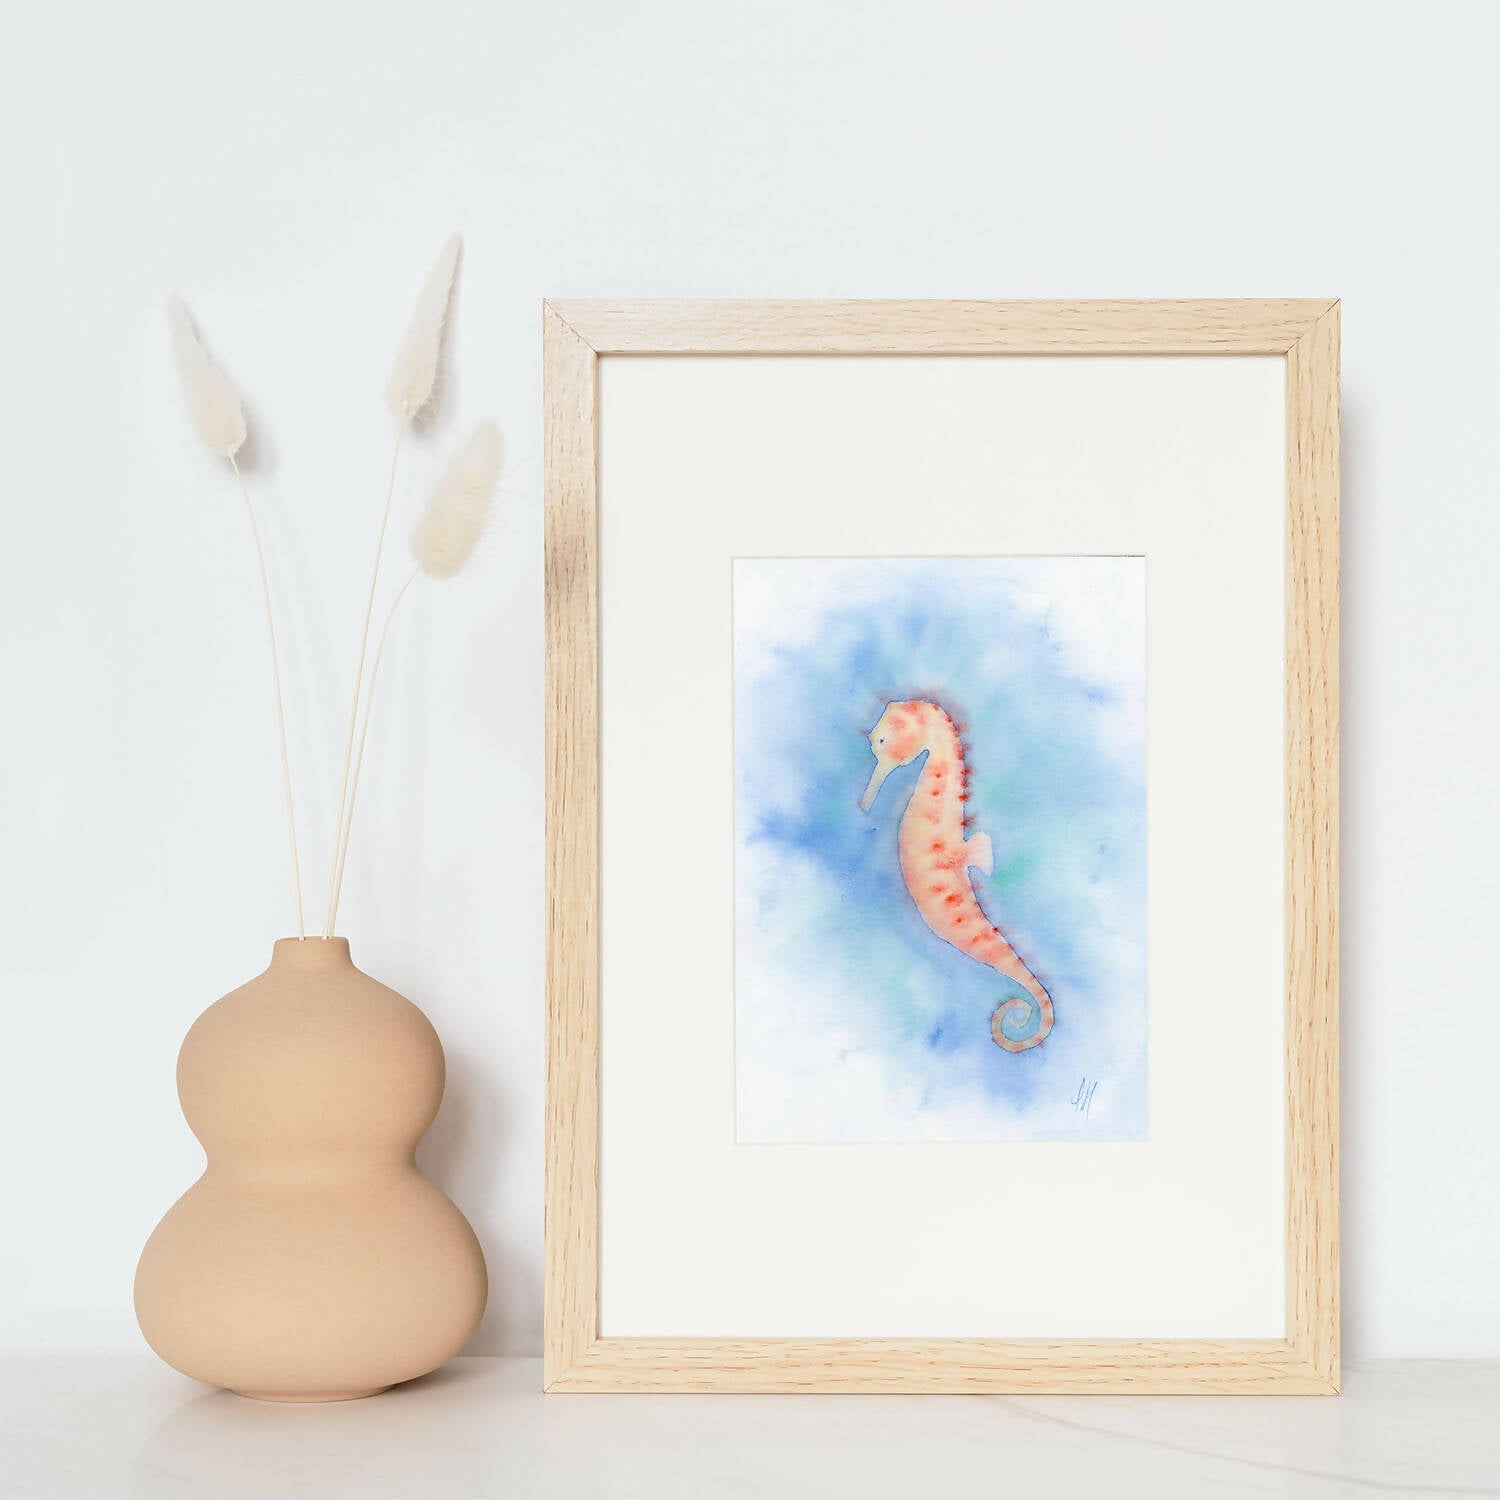 "Under the Sea" - A collection of original watercolour paintings - Shop Motif